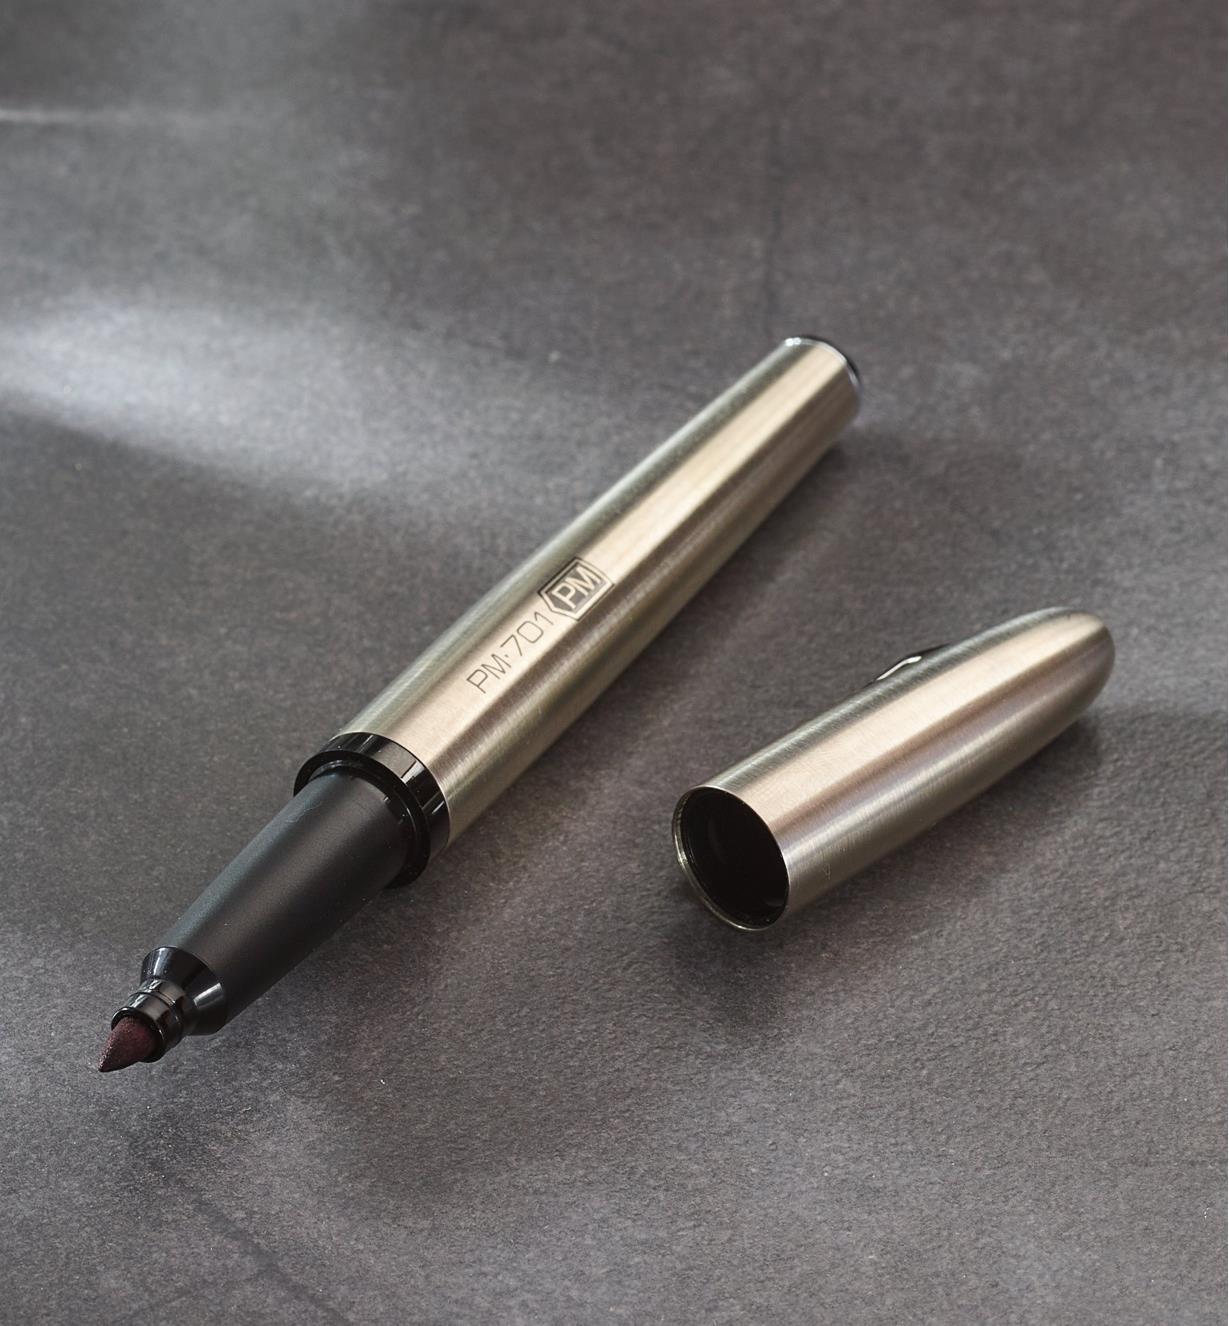 The Stainless Steel Marker and its cap sit side by side on a flat surface